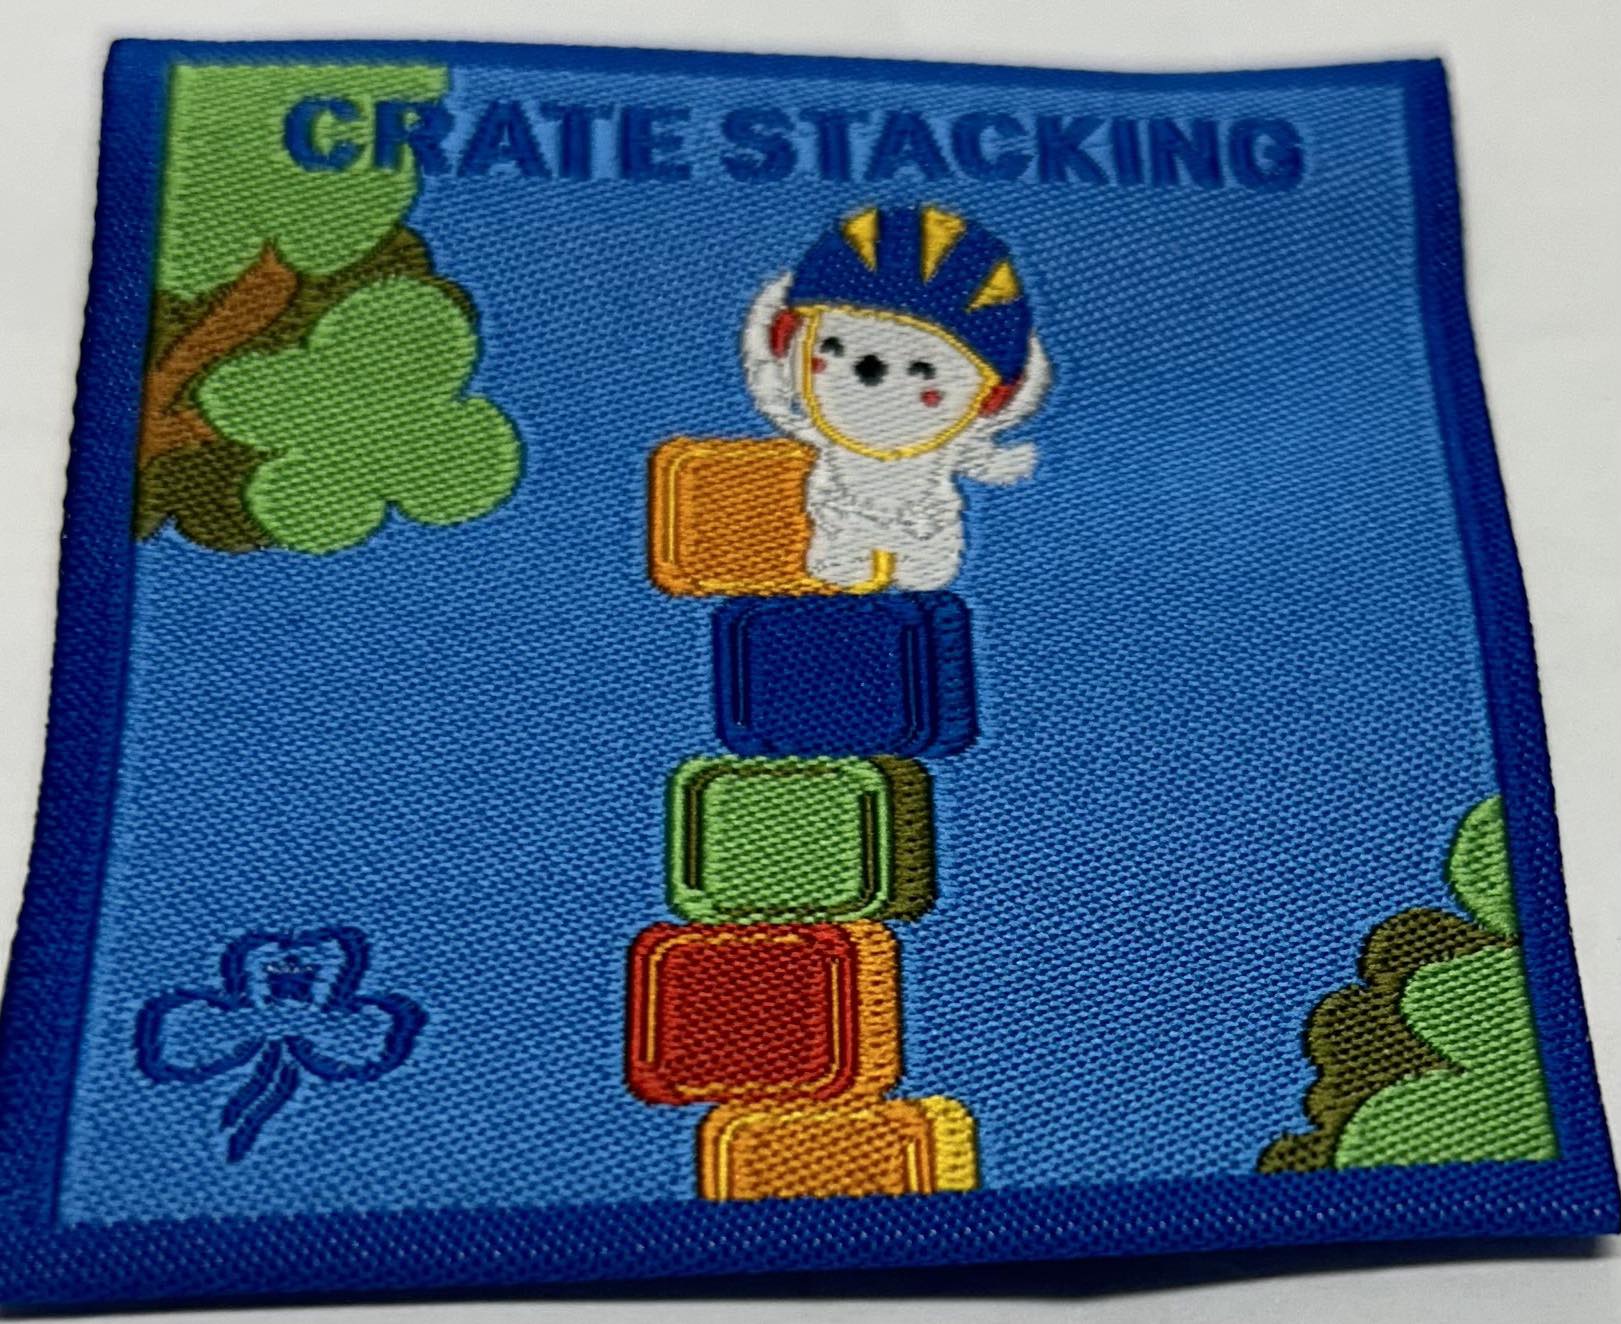 a square unbound blue badge with a koala wearing a helmet on top of some coloured crates